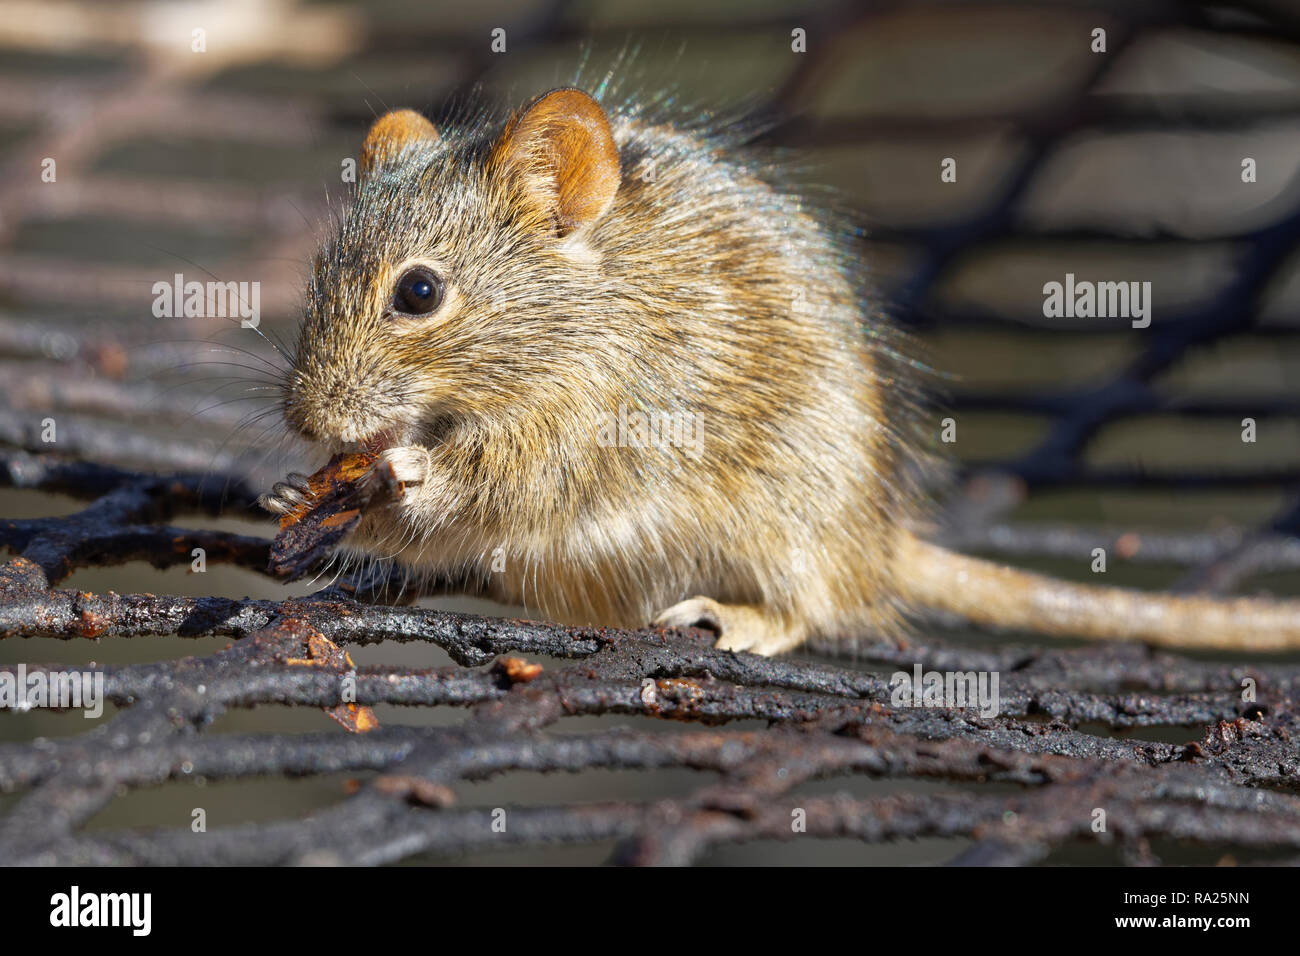 Four-striped grass mouse (Rhabdomys pumilio), on the grill, nibbling a piece of grilled meat, Mountain Zebra National Park, Eastern Cape, South Africa Stock Photo